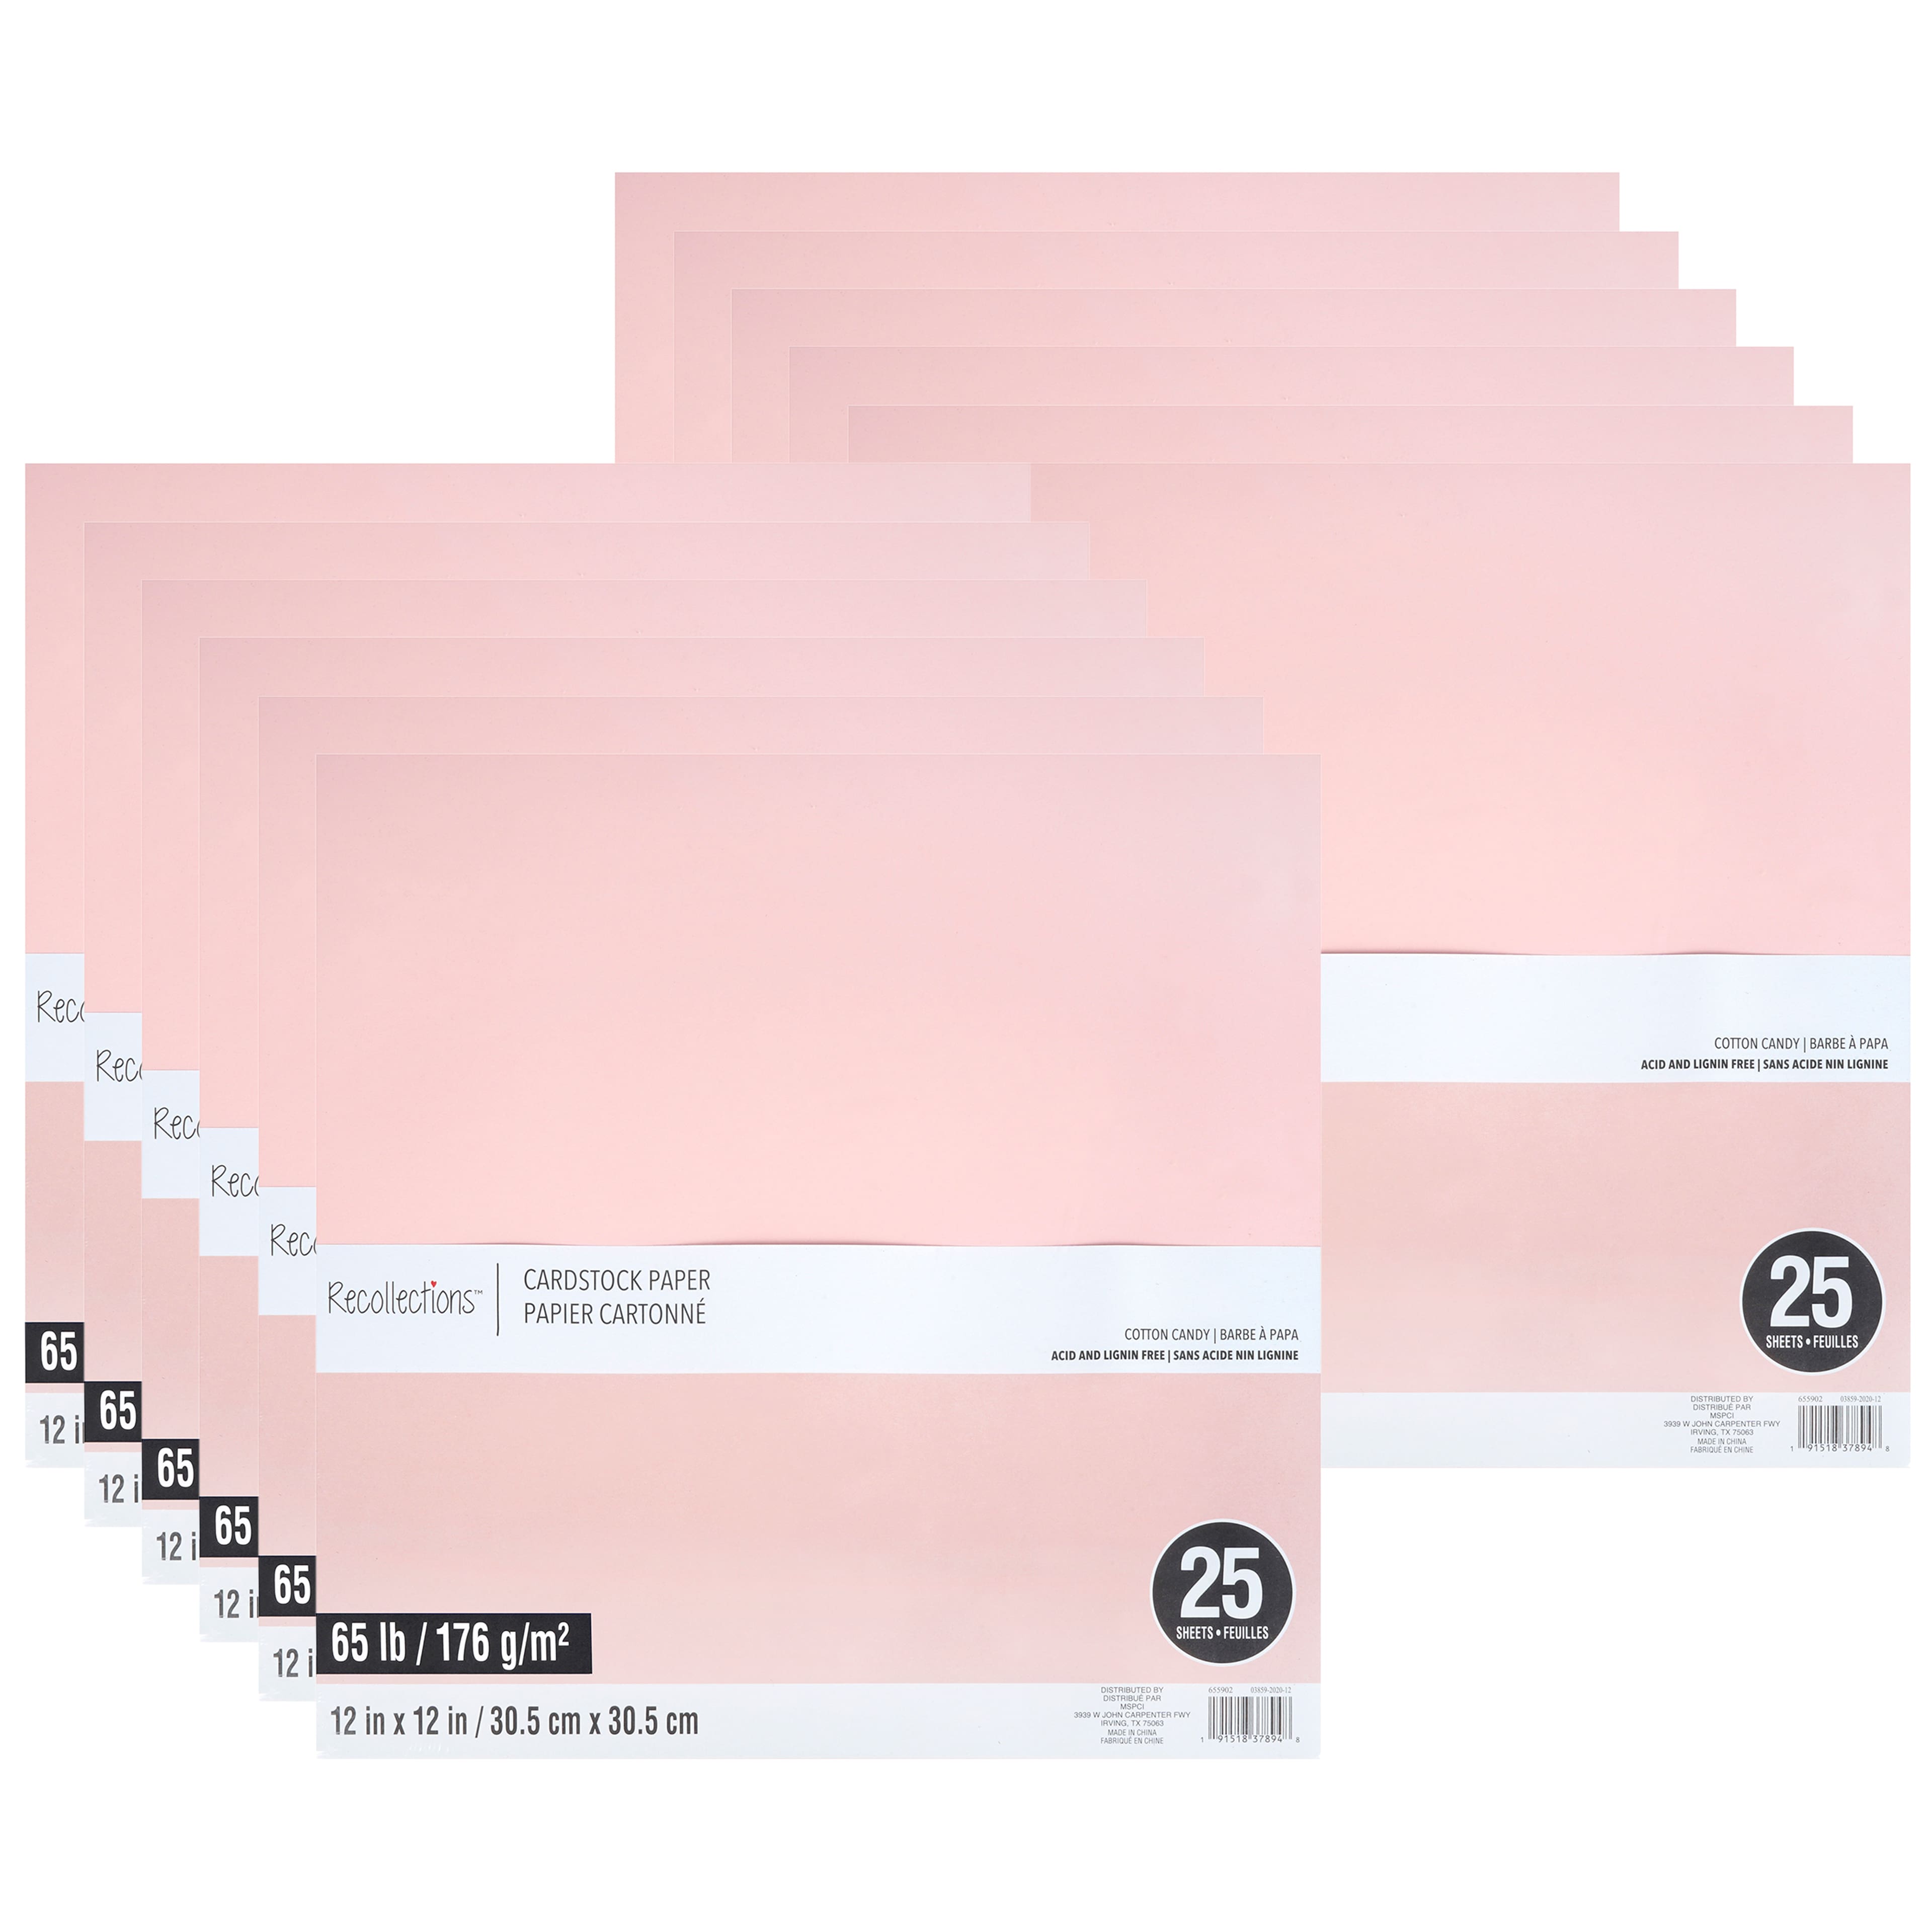 12 Packs: 25 ct. (300 total) 12 x 12 Cardstock Paper by